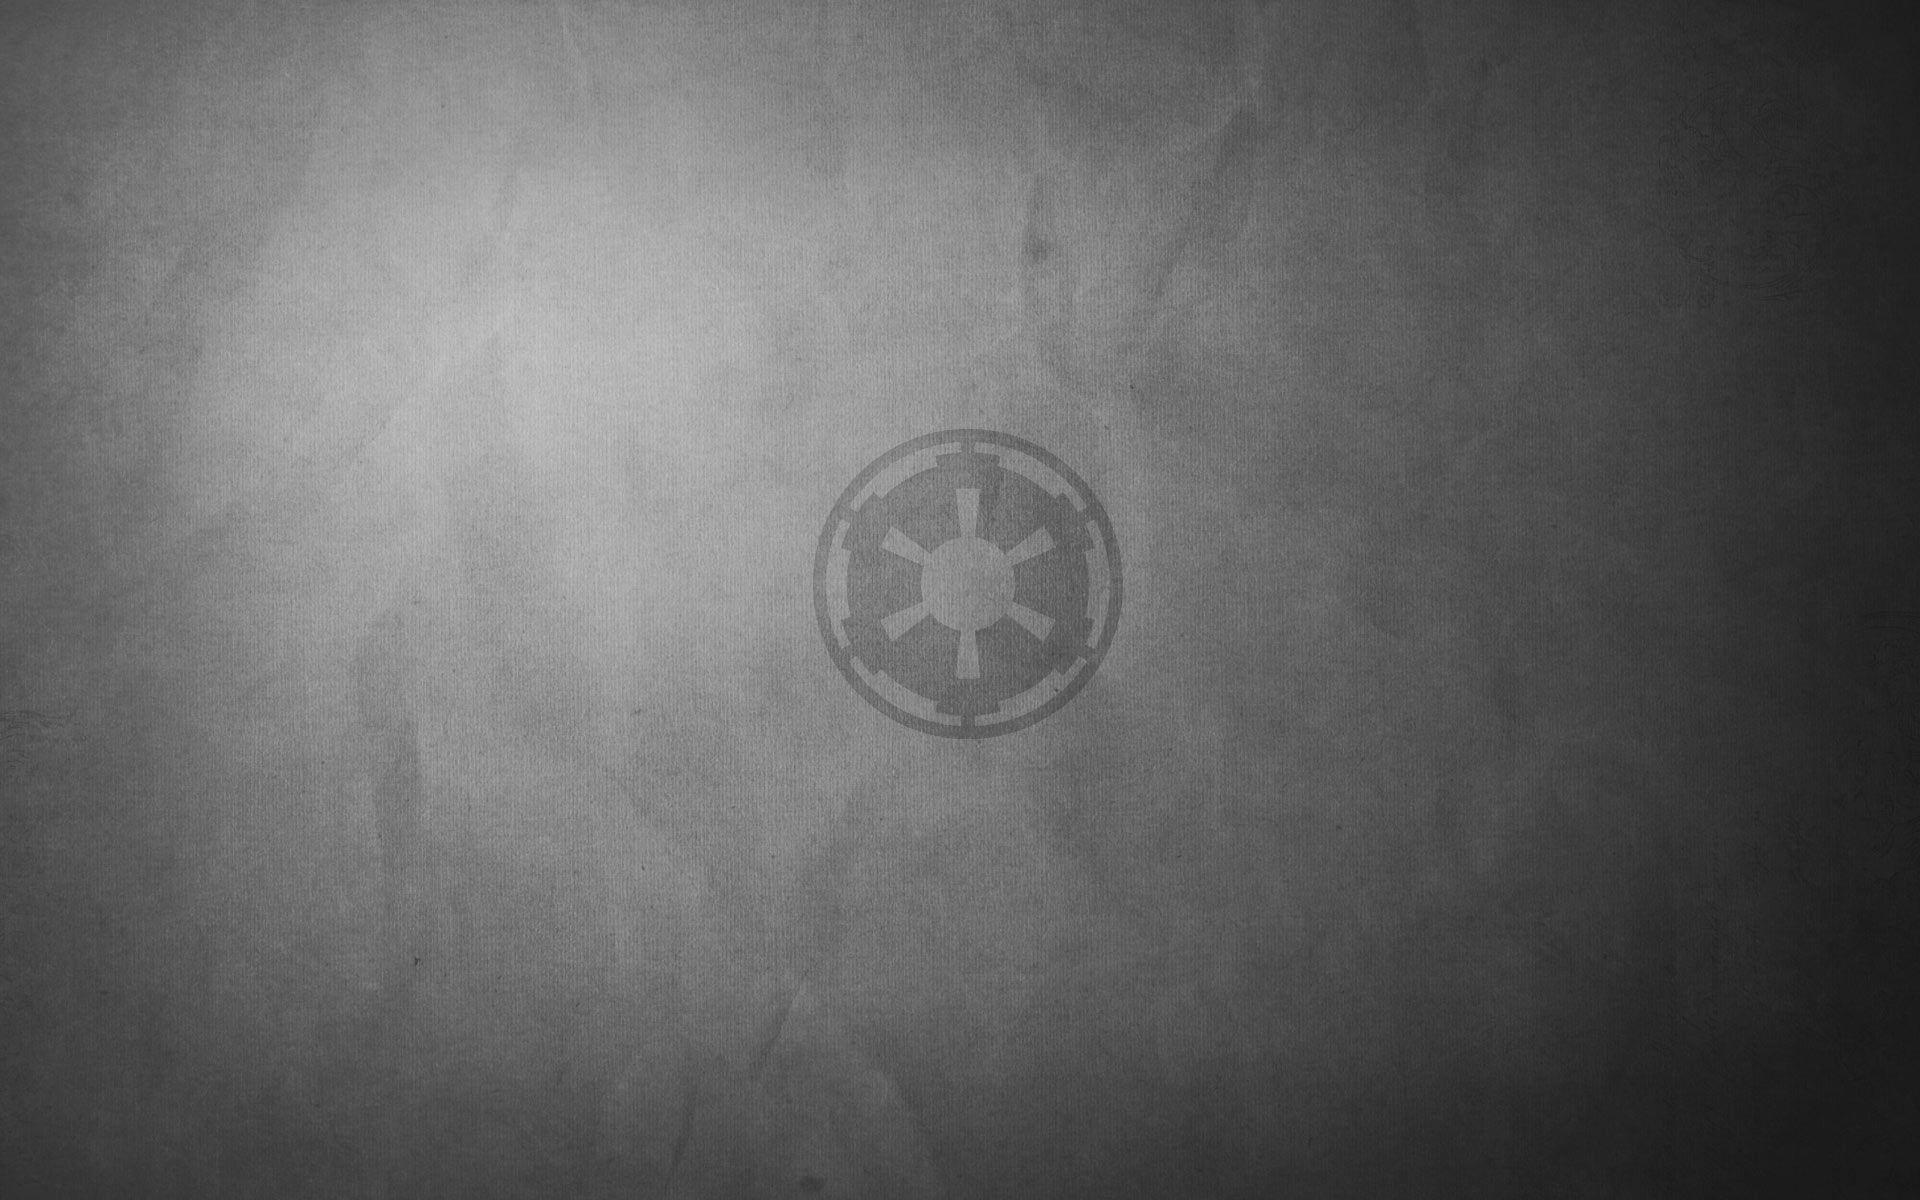 Wallpaper Star Wars Edition. As Far As I Can Tell